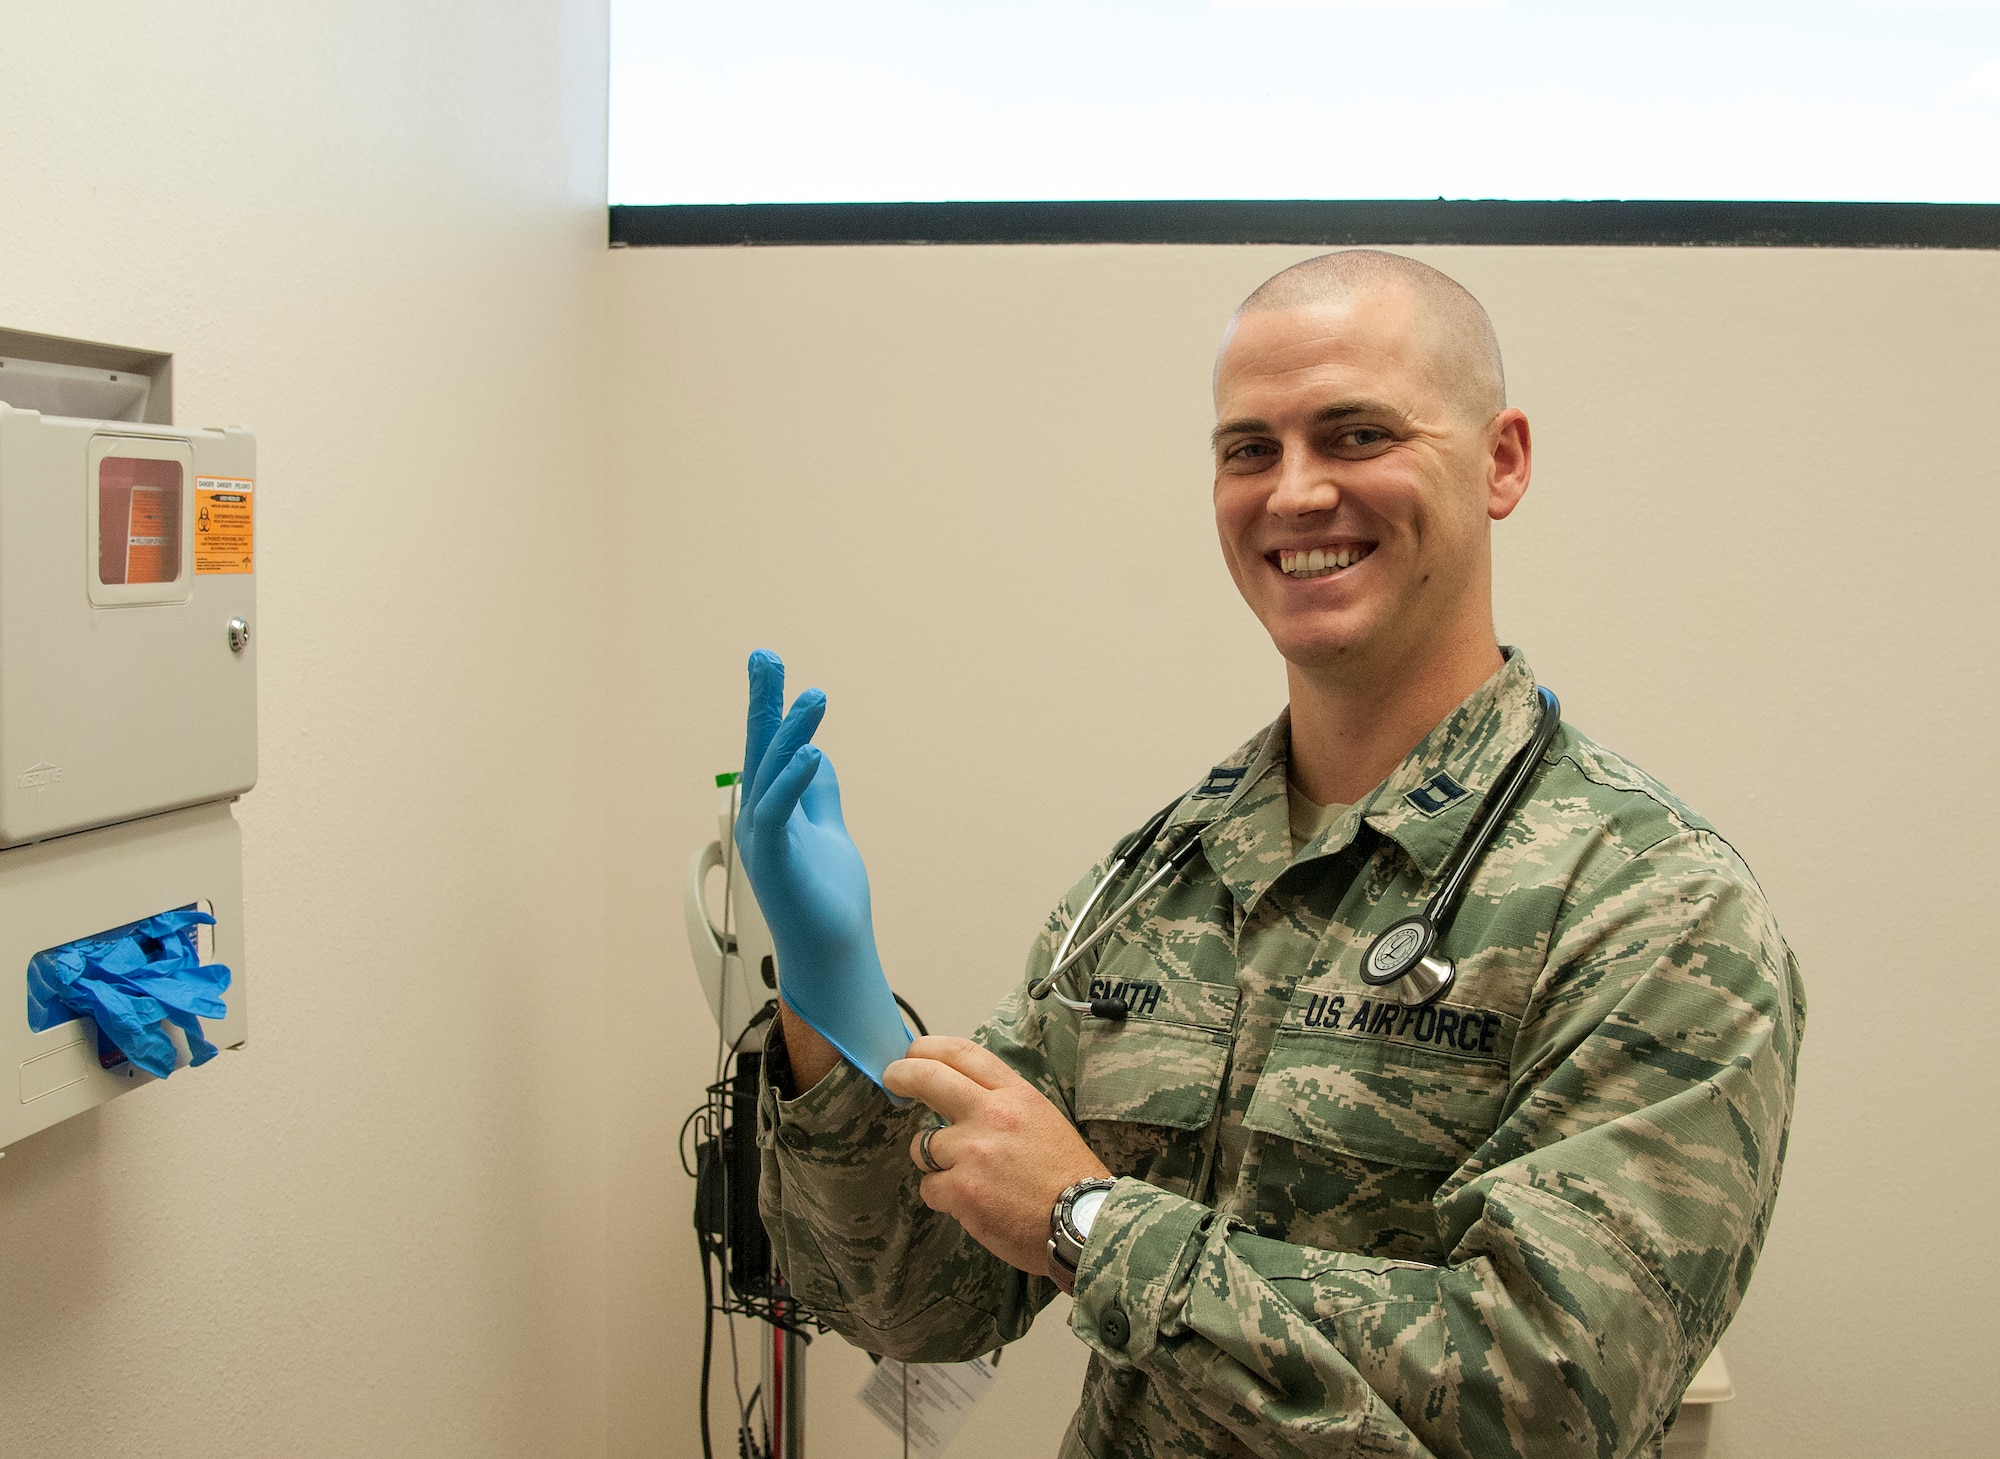 Capt. Nathan Smith, 90th Medical Operations Squadron Nuclear Operations Clinic element chief, puts on a glove as he poses in an examination room in the 90th Medical Group Medical Treatment Facility on F.E. Warren Air Force Base, Wyo, Aug. 19, 2015. Smith recommends patients seek medical treatment if they exhibit the “classic triad” of rhabdomyolyisis symptoms — muscle weakness, muscle pain an dark urine. (U.S. Air Force photo by Senior Airman Jason Wiese)